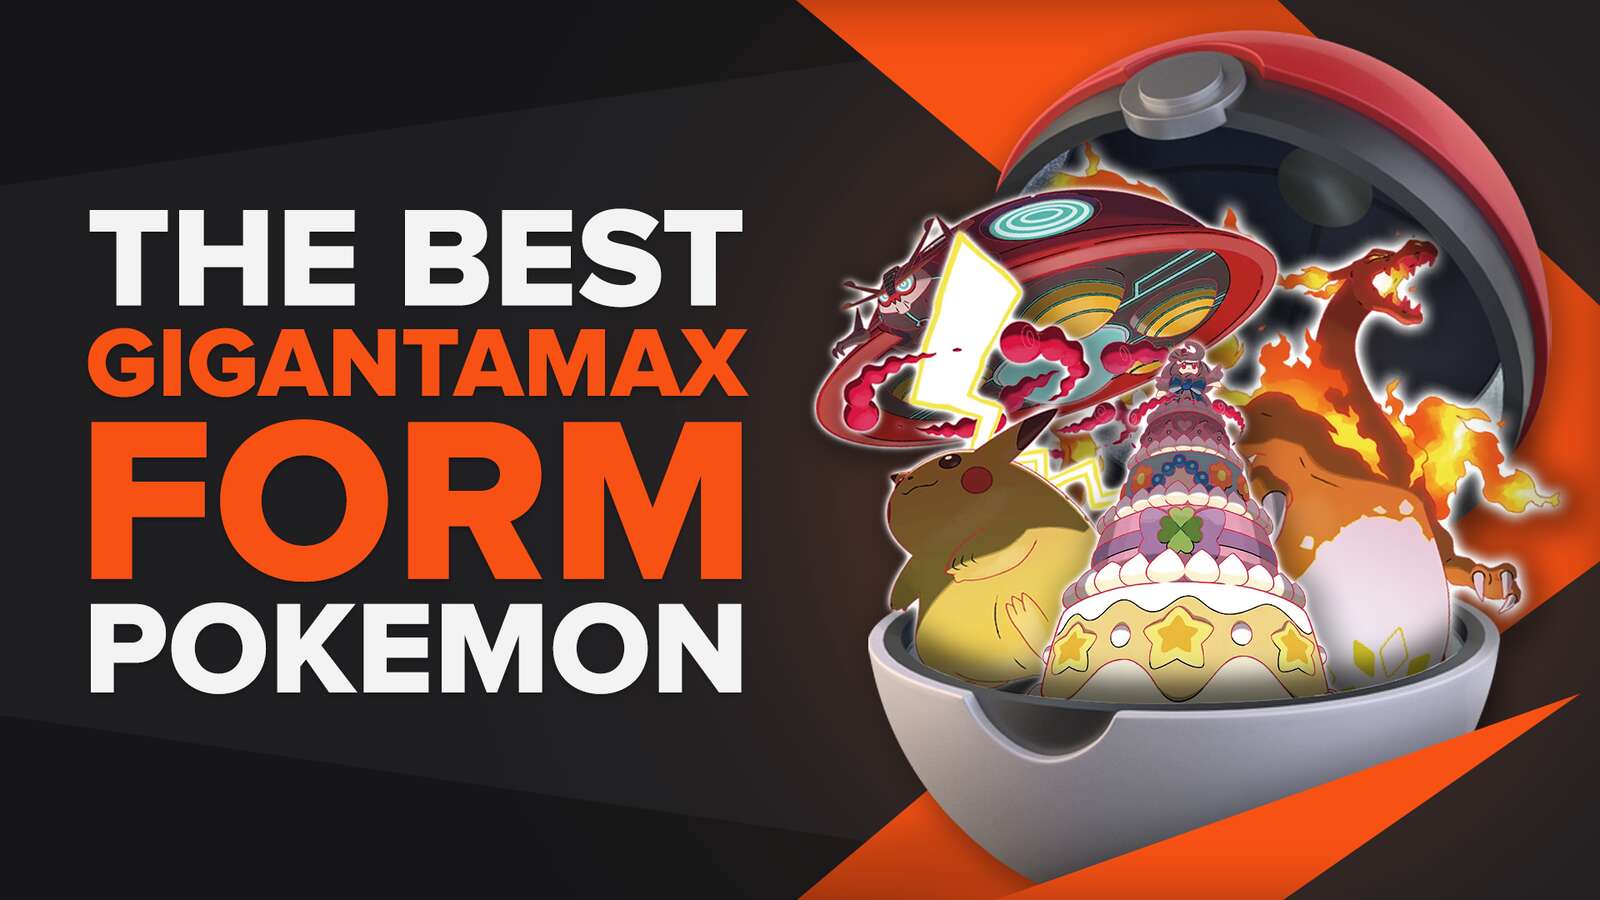 The Absolute 10 Best Gigantamax Form Pokemon [Ranked]